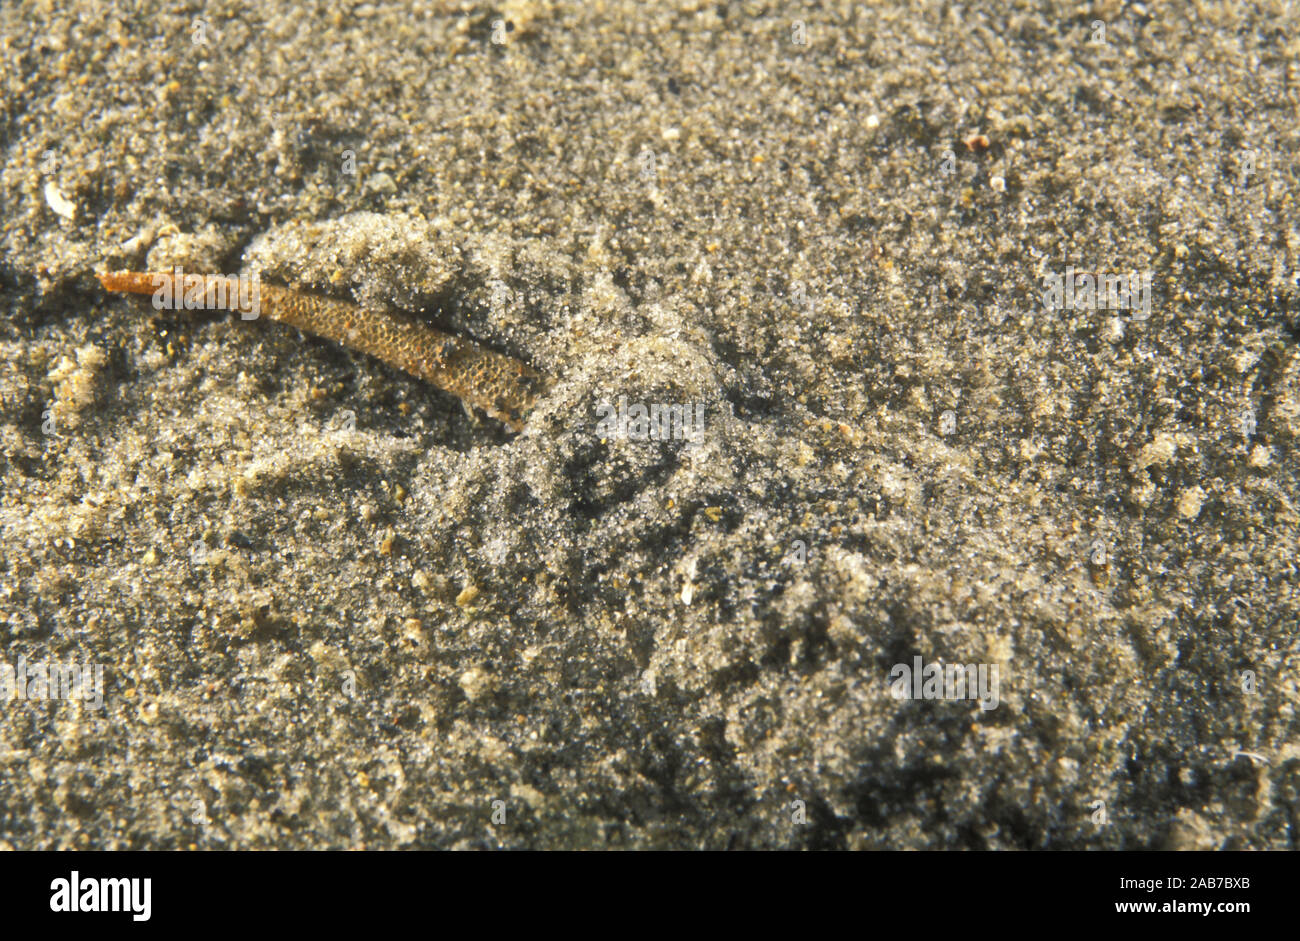 Tubeworm (Pectinaria sp.), polychaete worm that builds a rigid tube by cementing sand grains together, and carries it about as it moves over and throu Stock Photo